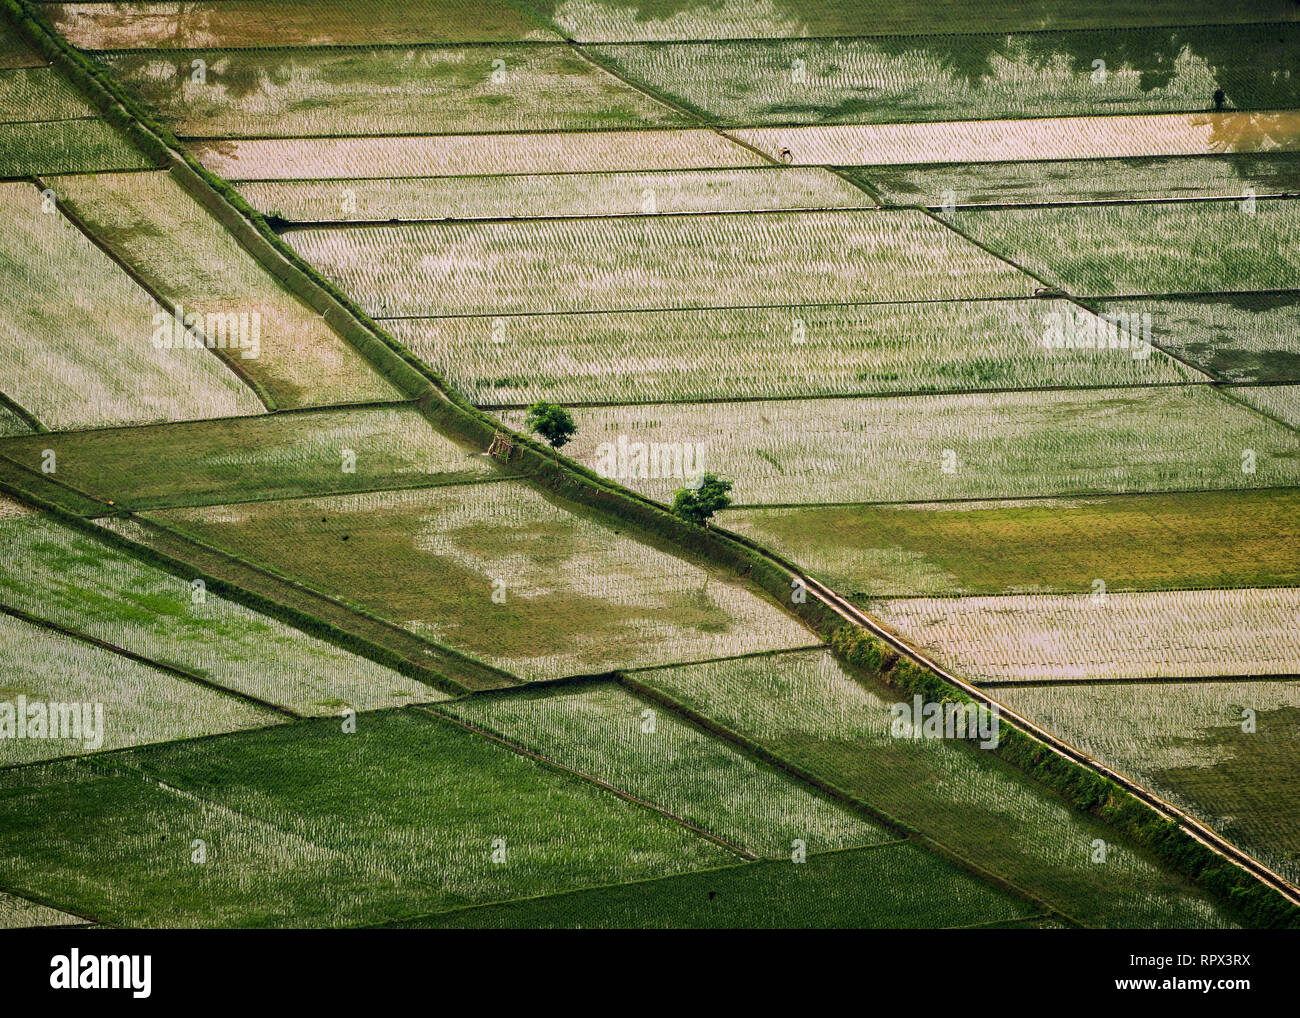 Aerial view of flooded rice fields, Indonesia Stock Photo